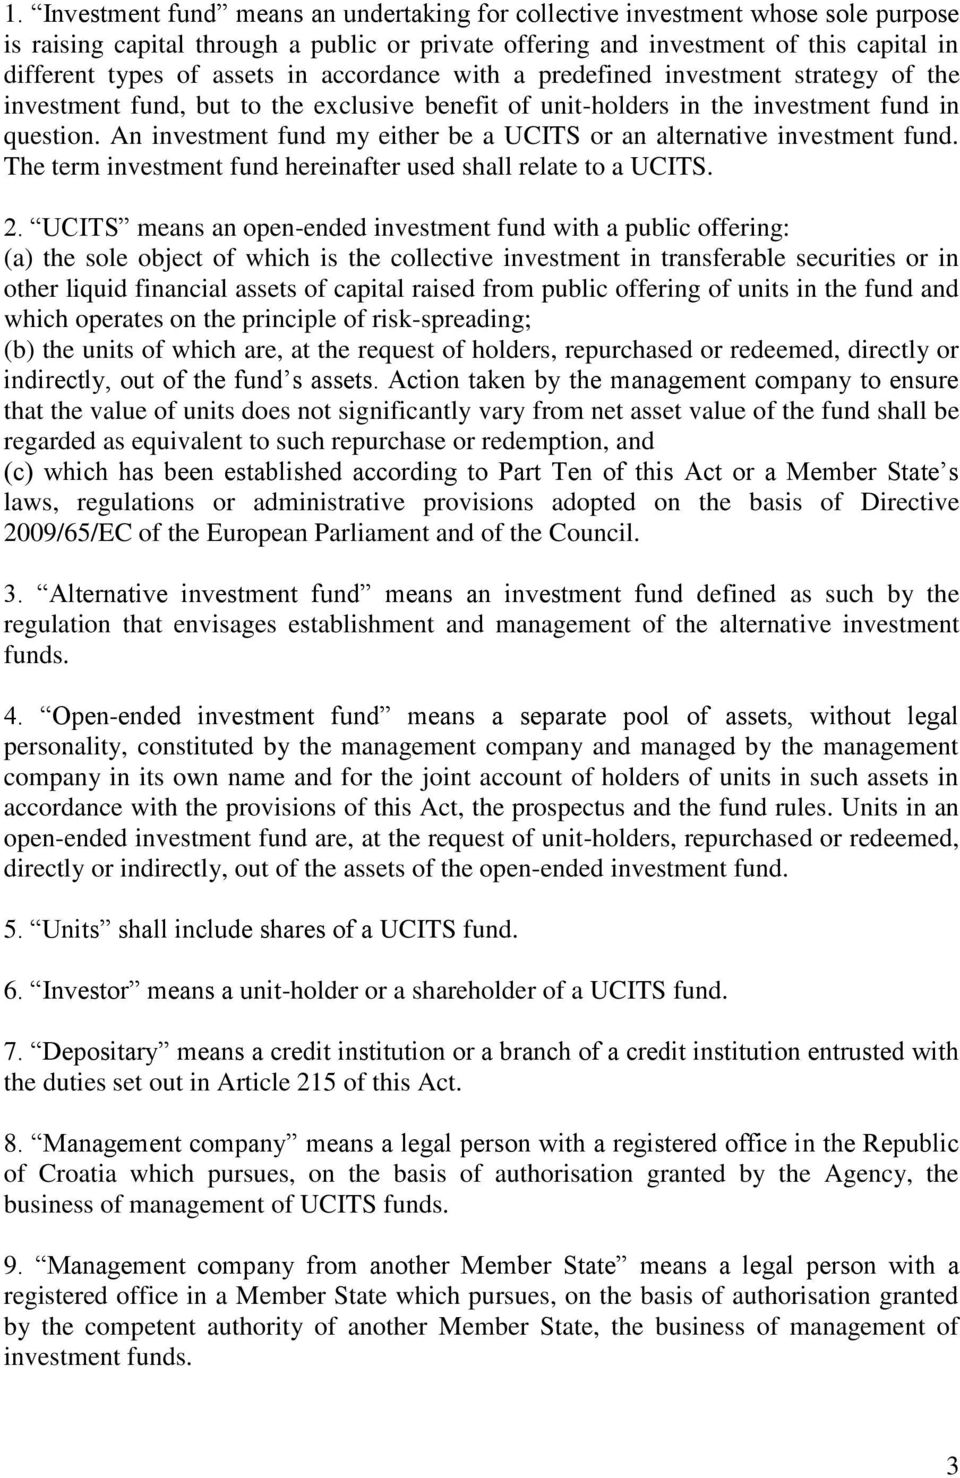 An investment fund my either be a UCITS or an alternative investment fund. The term investment fund hereinafter used shall relate to a UCITS. 2.